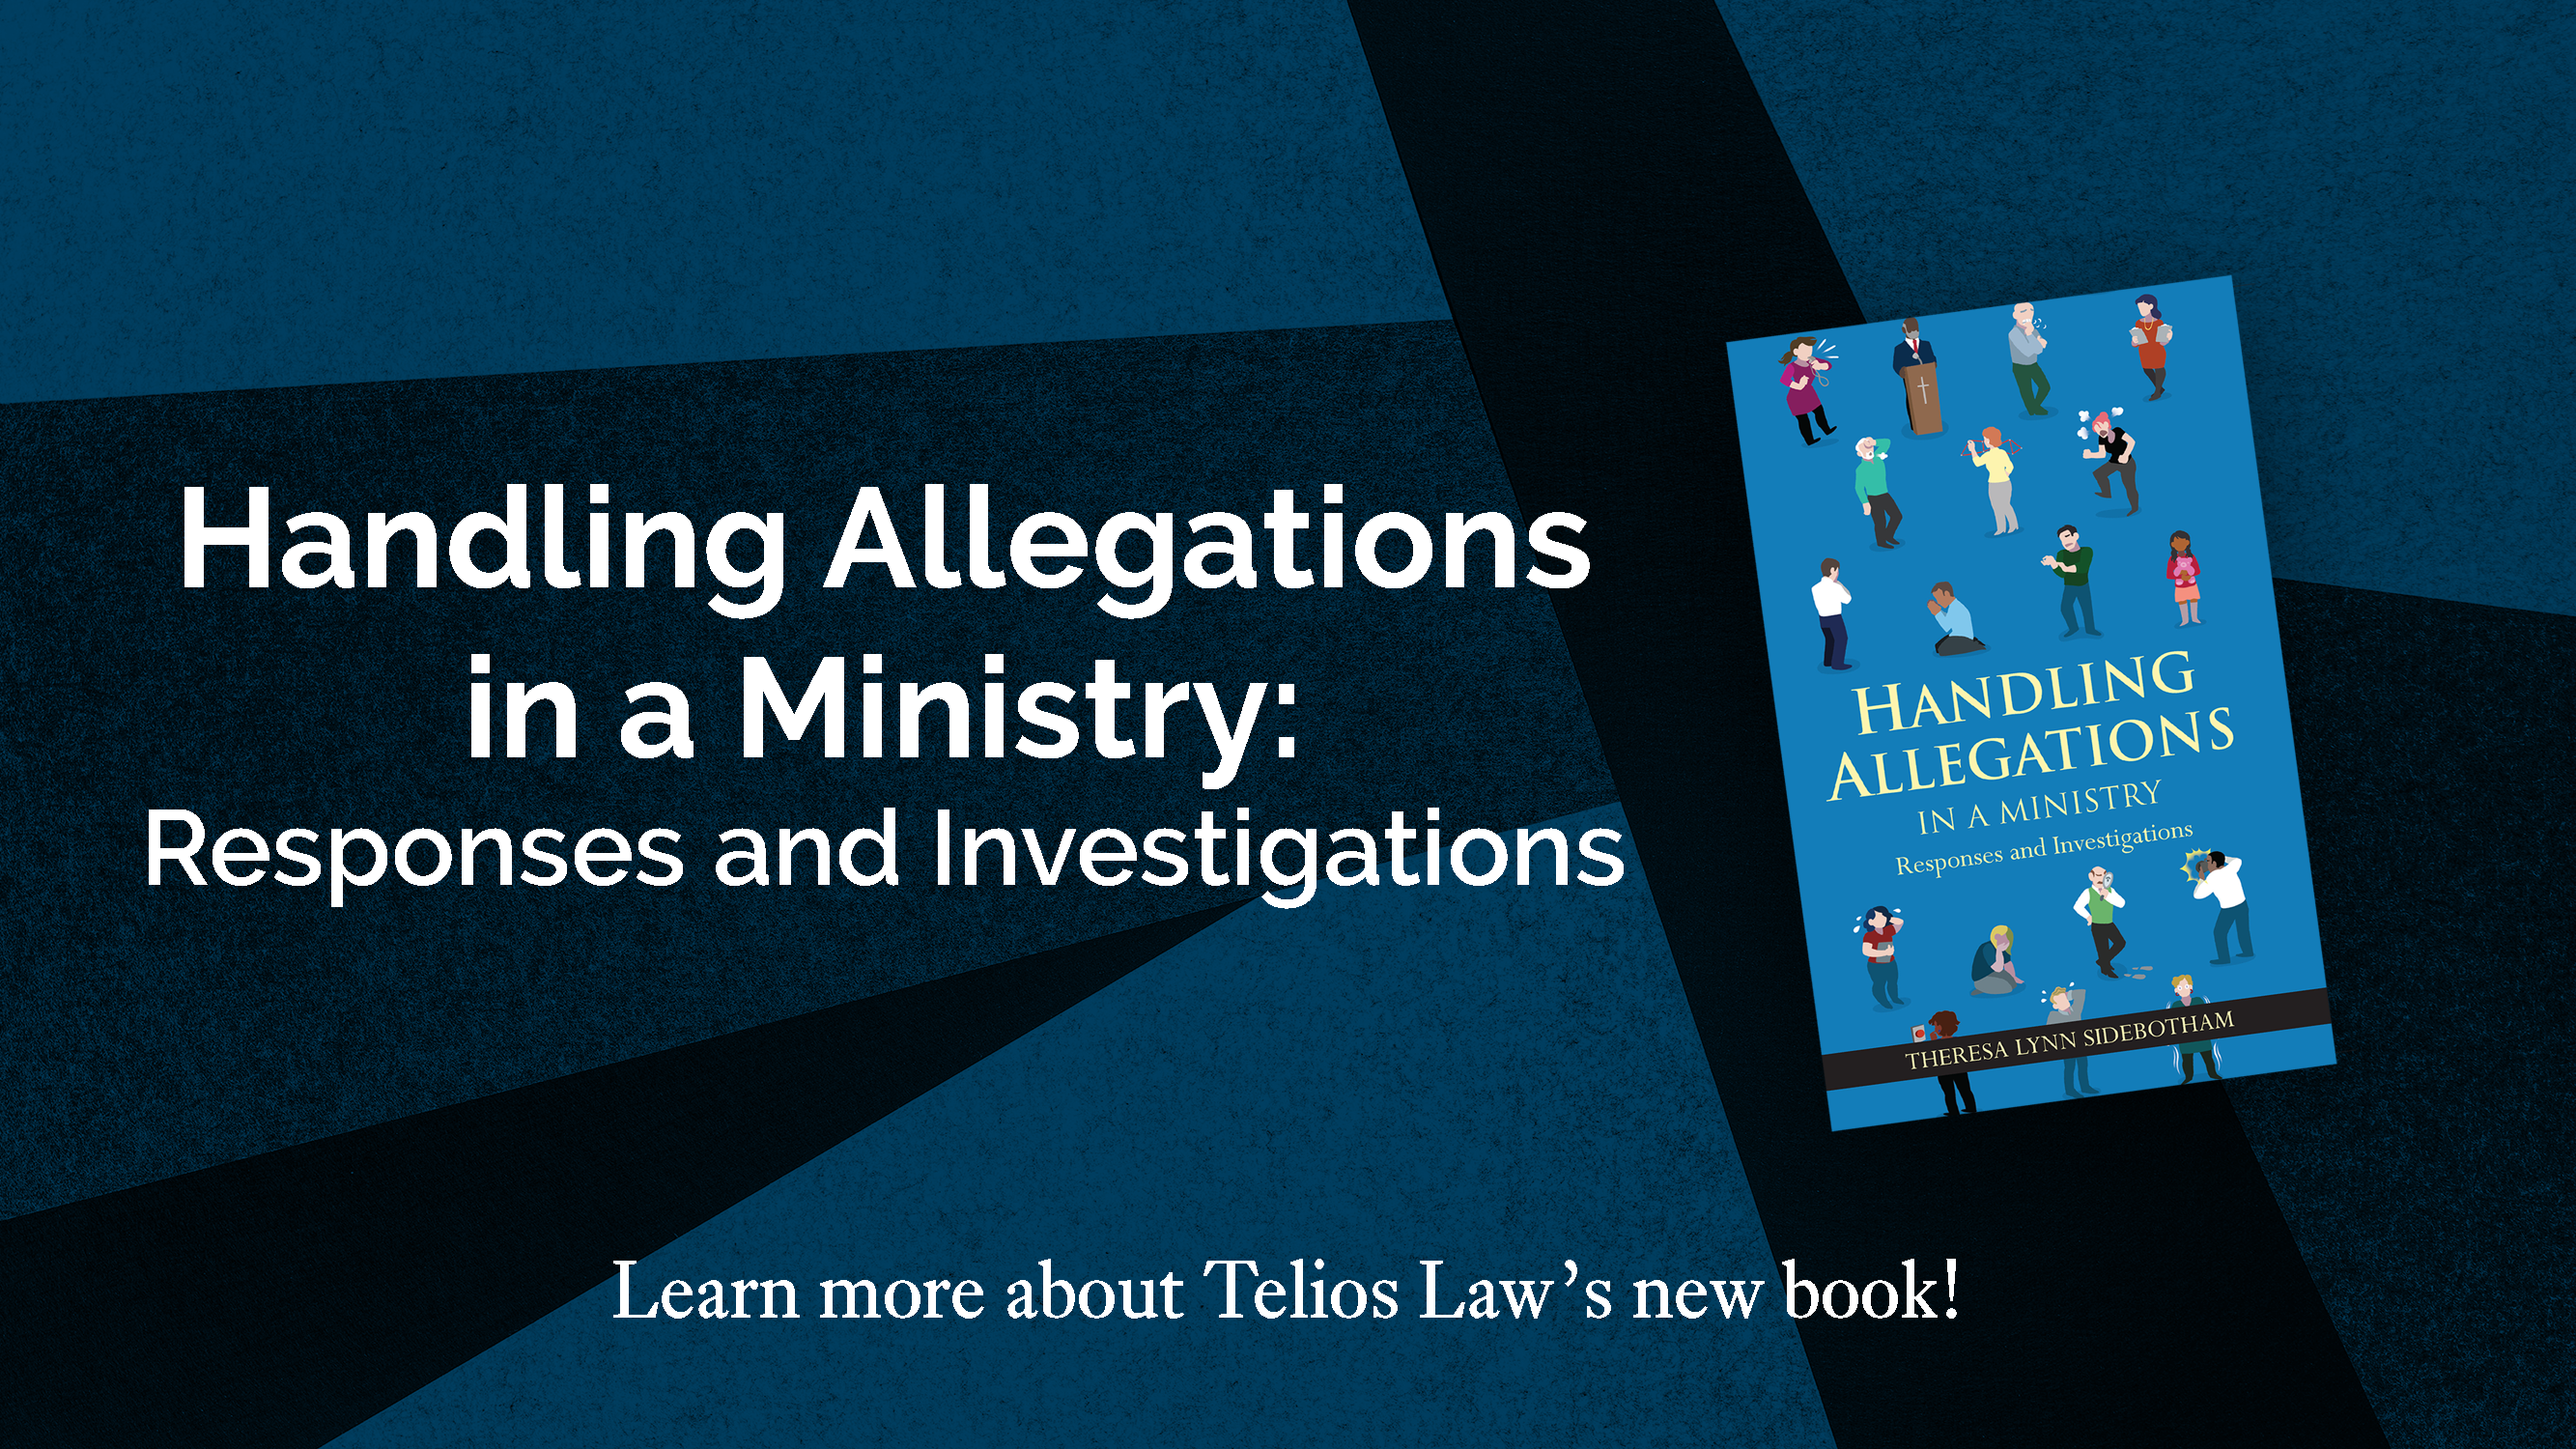 Cover of the "Handling Allegations" book on a blue background